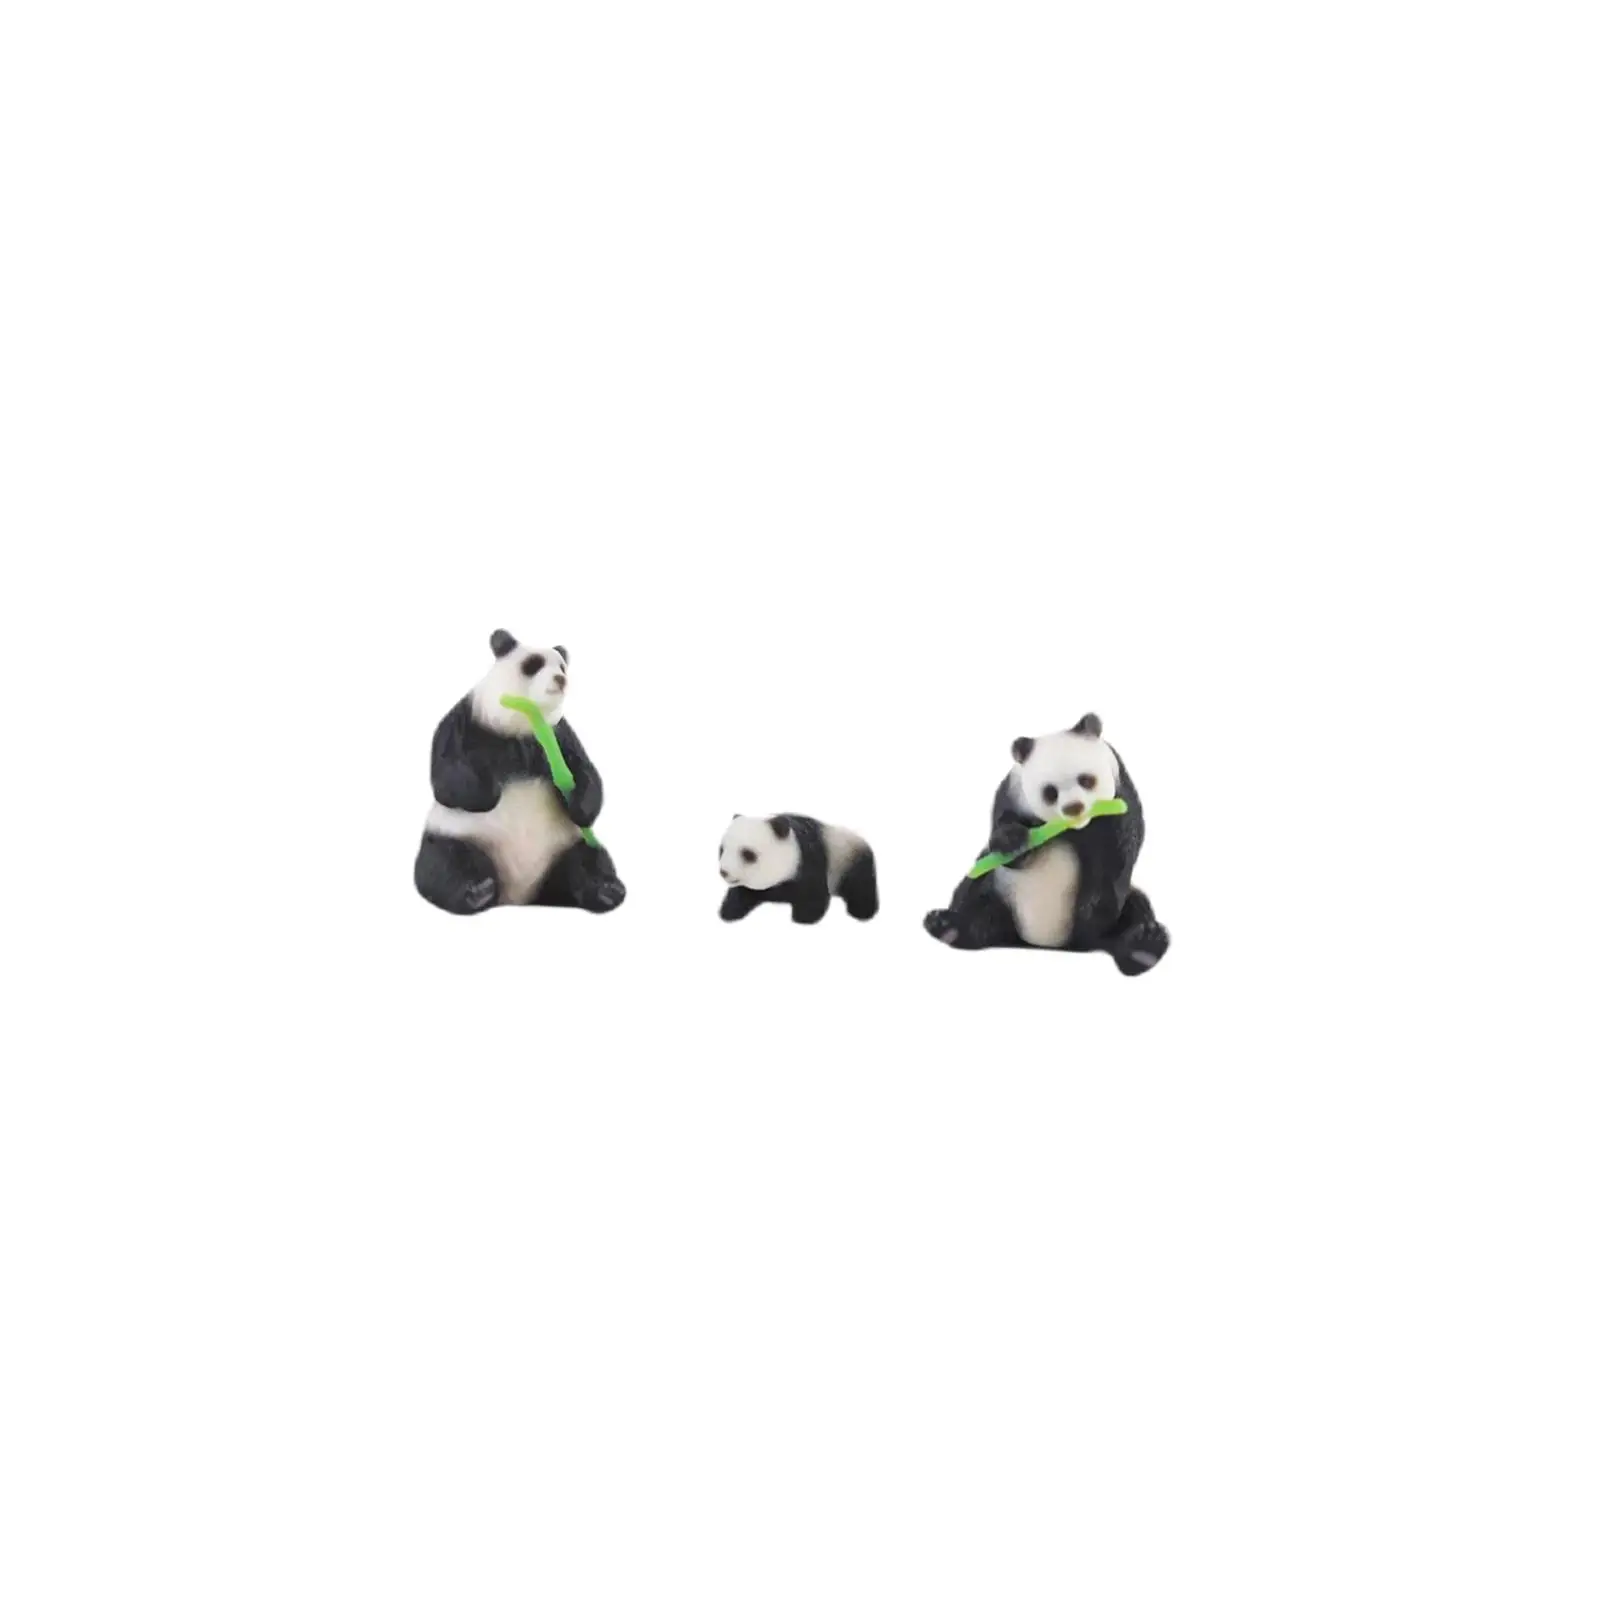 Miniature Resin Pandas 1:64 Scale Party Micro Landscapes Adorable DIY Crafts Handpainted Dollhouse Cake Toppers Decor Collection